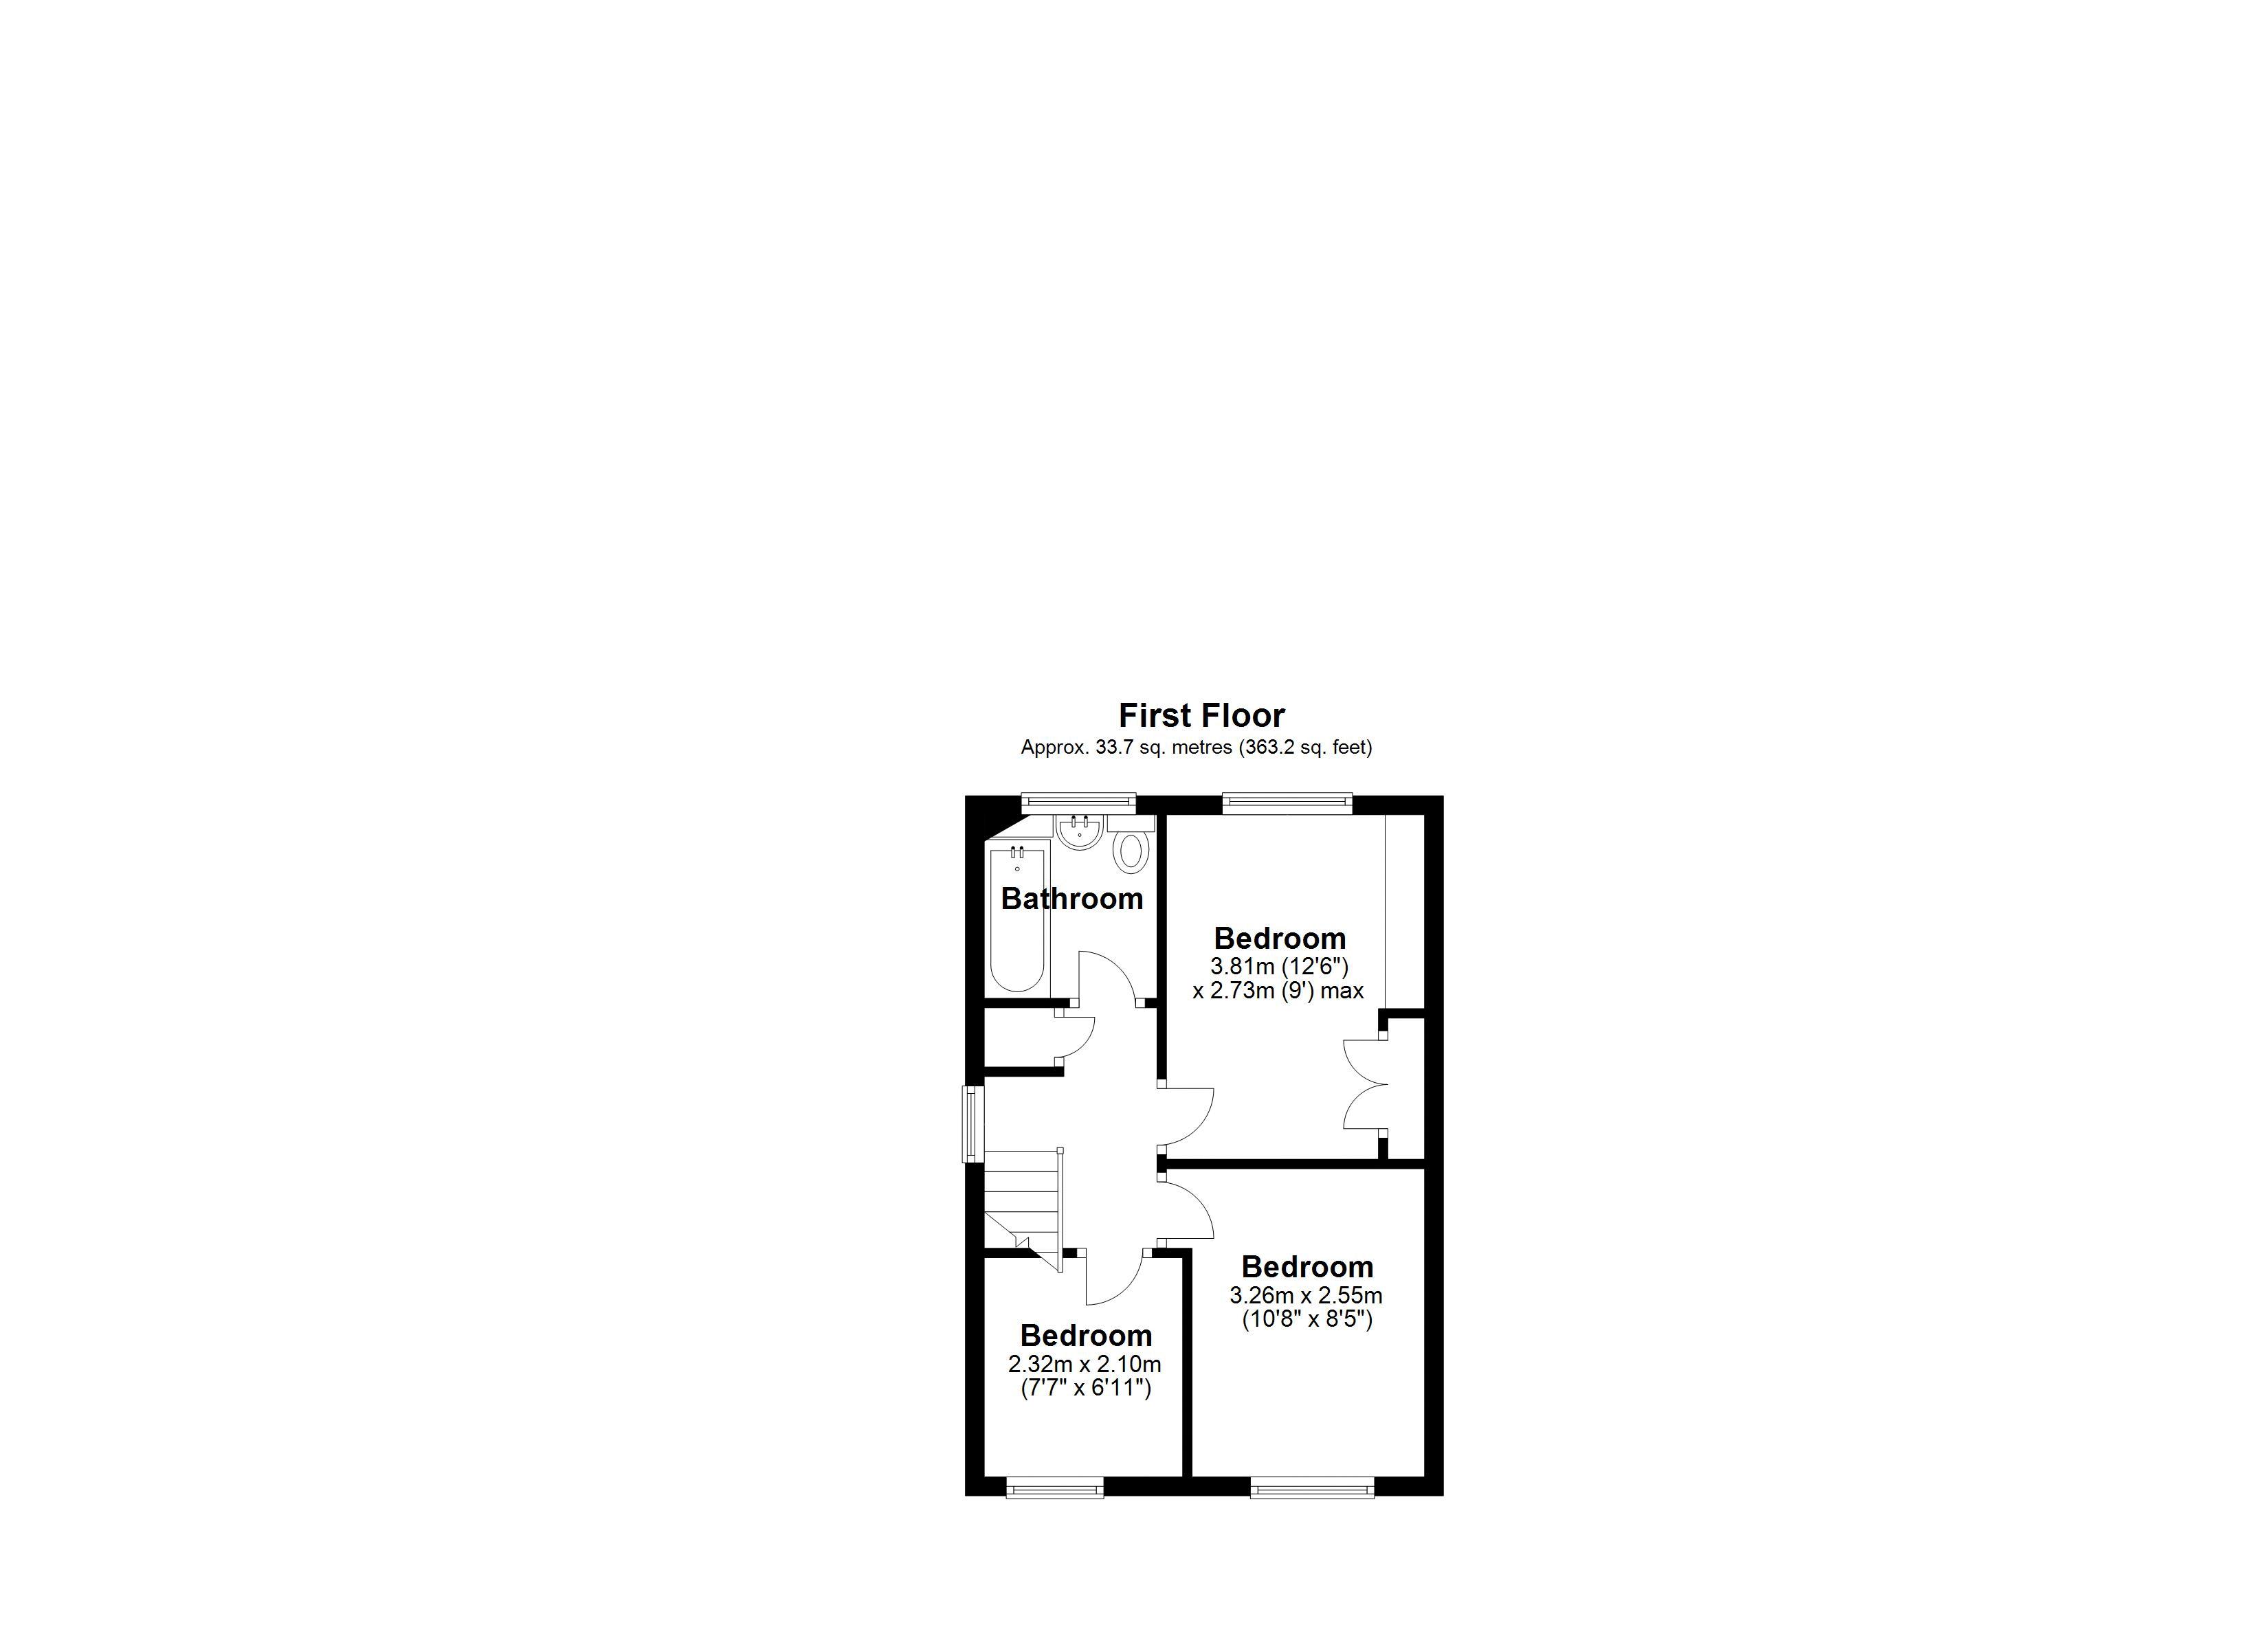 Manor Rise first floor plan